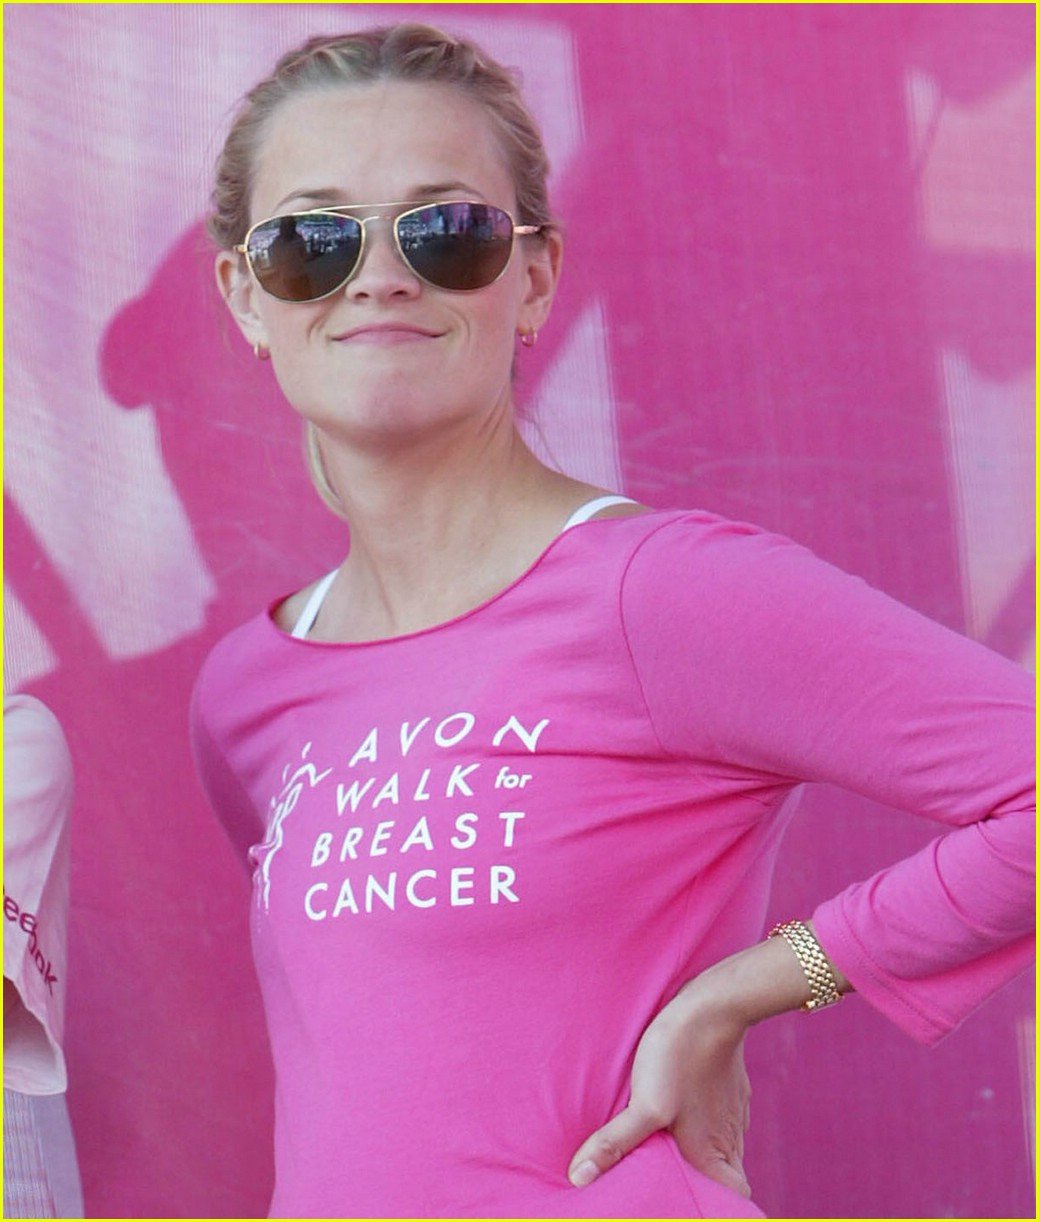 Reese Witherspoon Walks for Breast Cancer : Photo 1110891 | Reese Witherspoon Pictures ...1039 x 1222